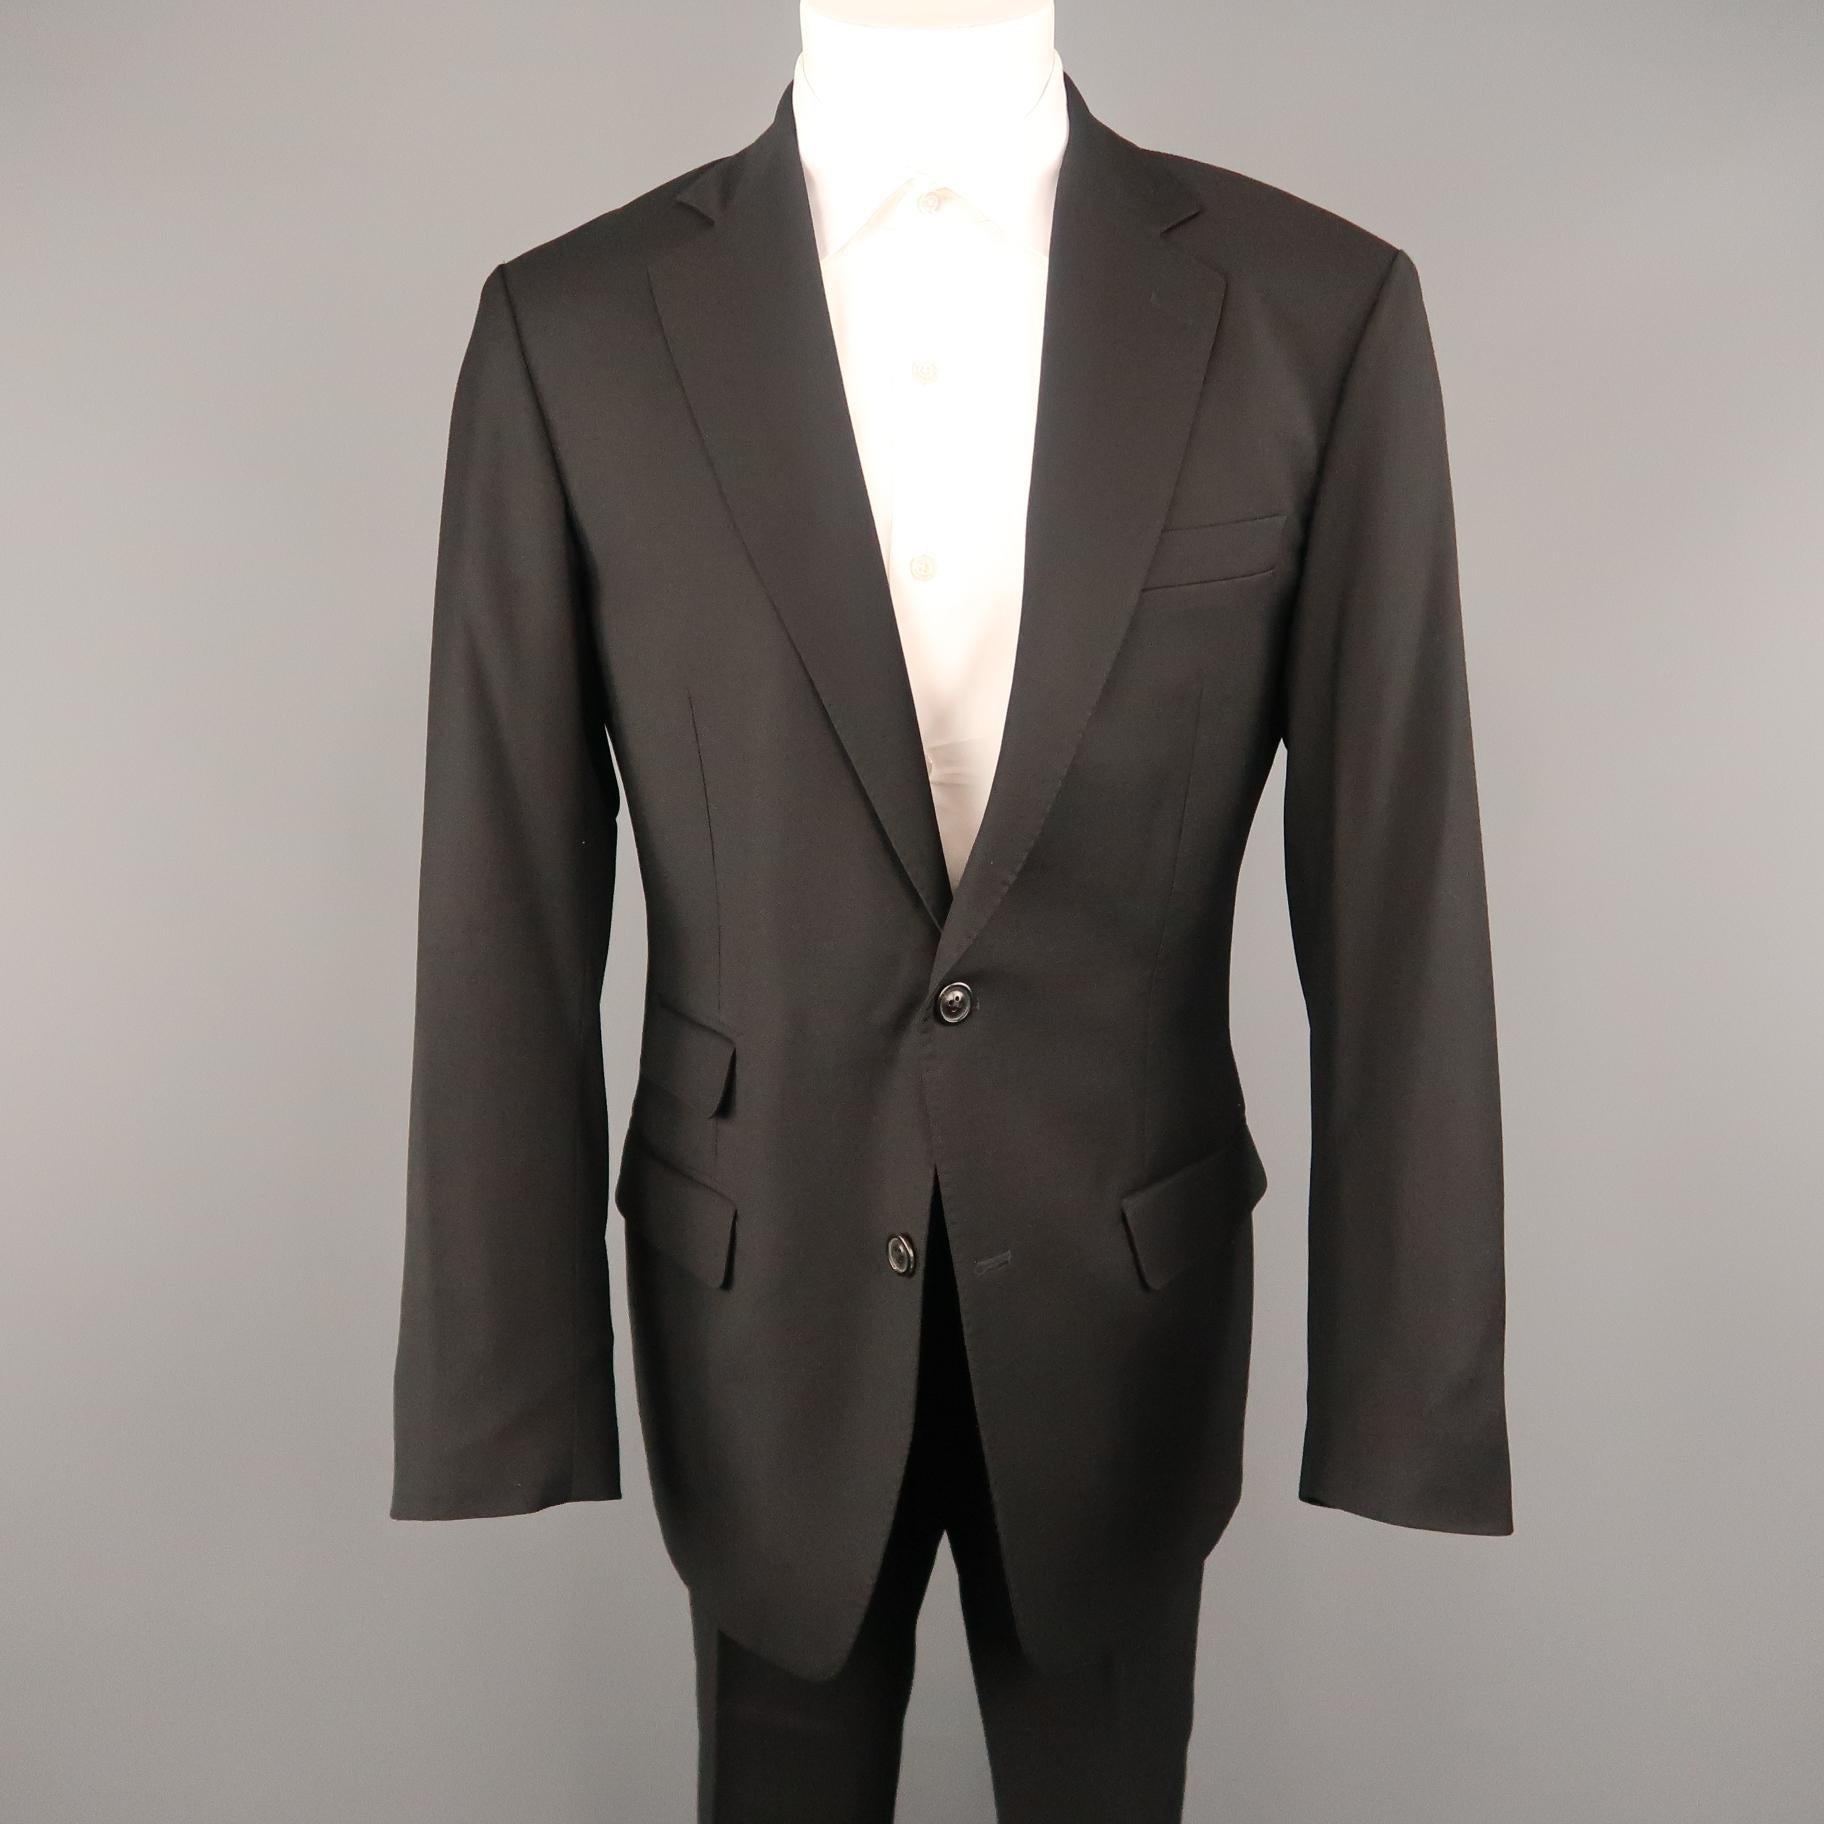 MARTIN MARGIELA REPLICA 80's suit comes in black lana wool twill and includes a single breasted, one button sport coat with notch lapel, functional button cuffs, mock second button detail and matching flat  front trousers. Made in Italy.
 
Excellent